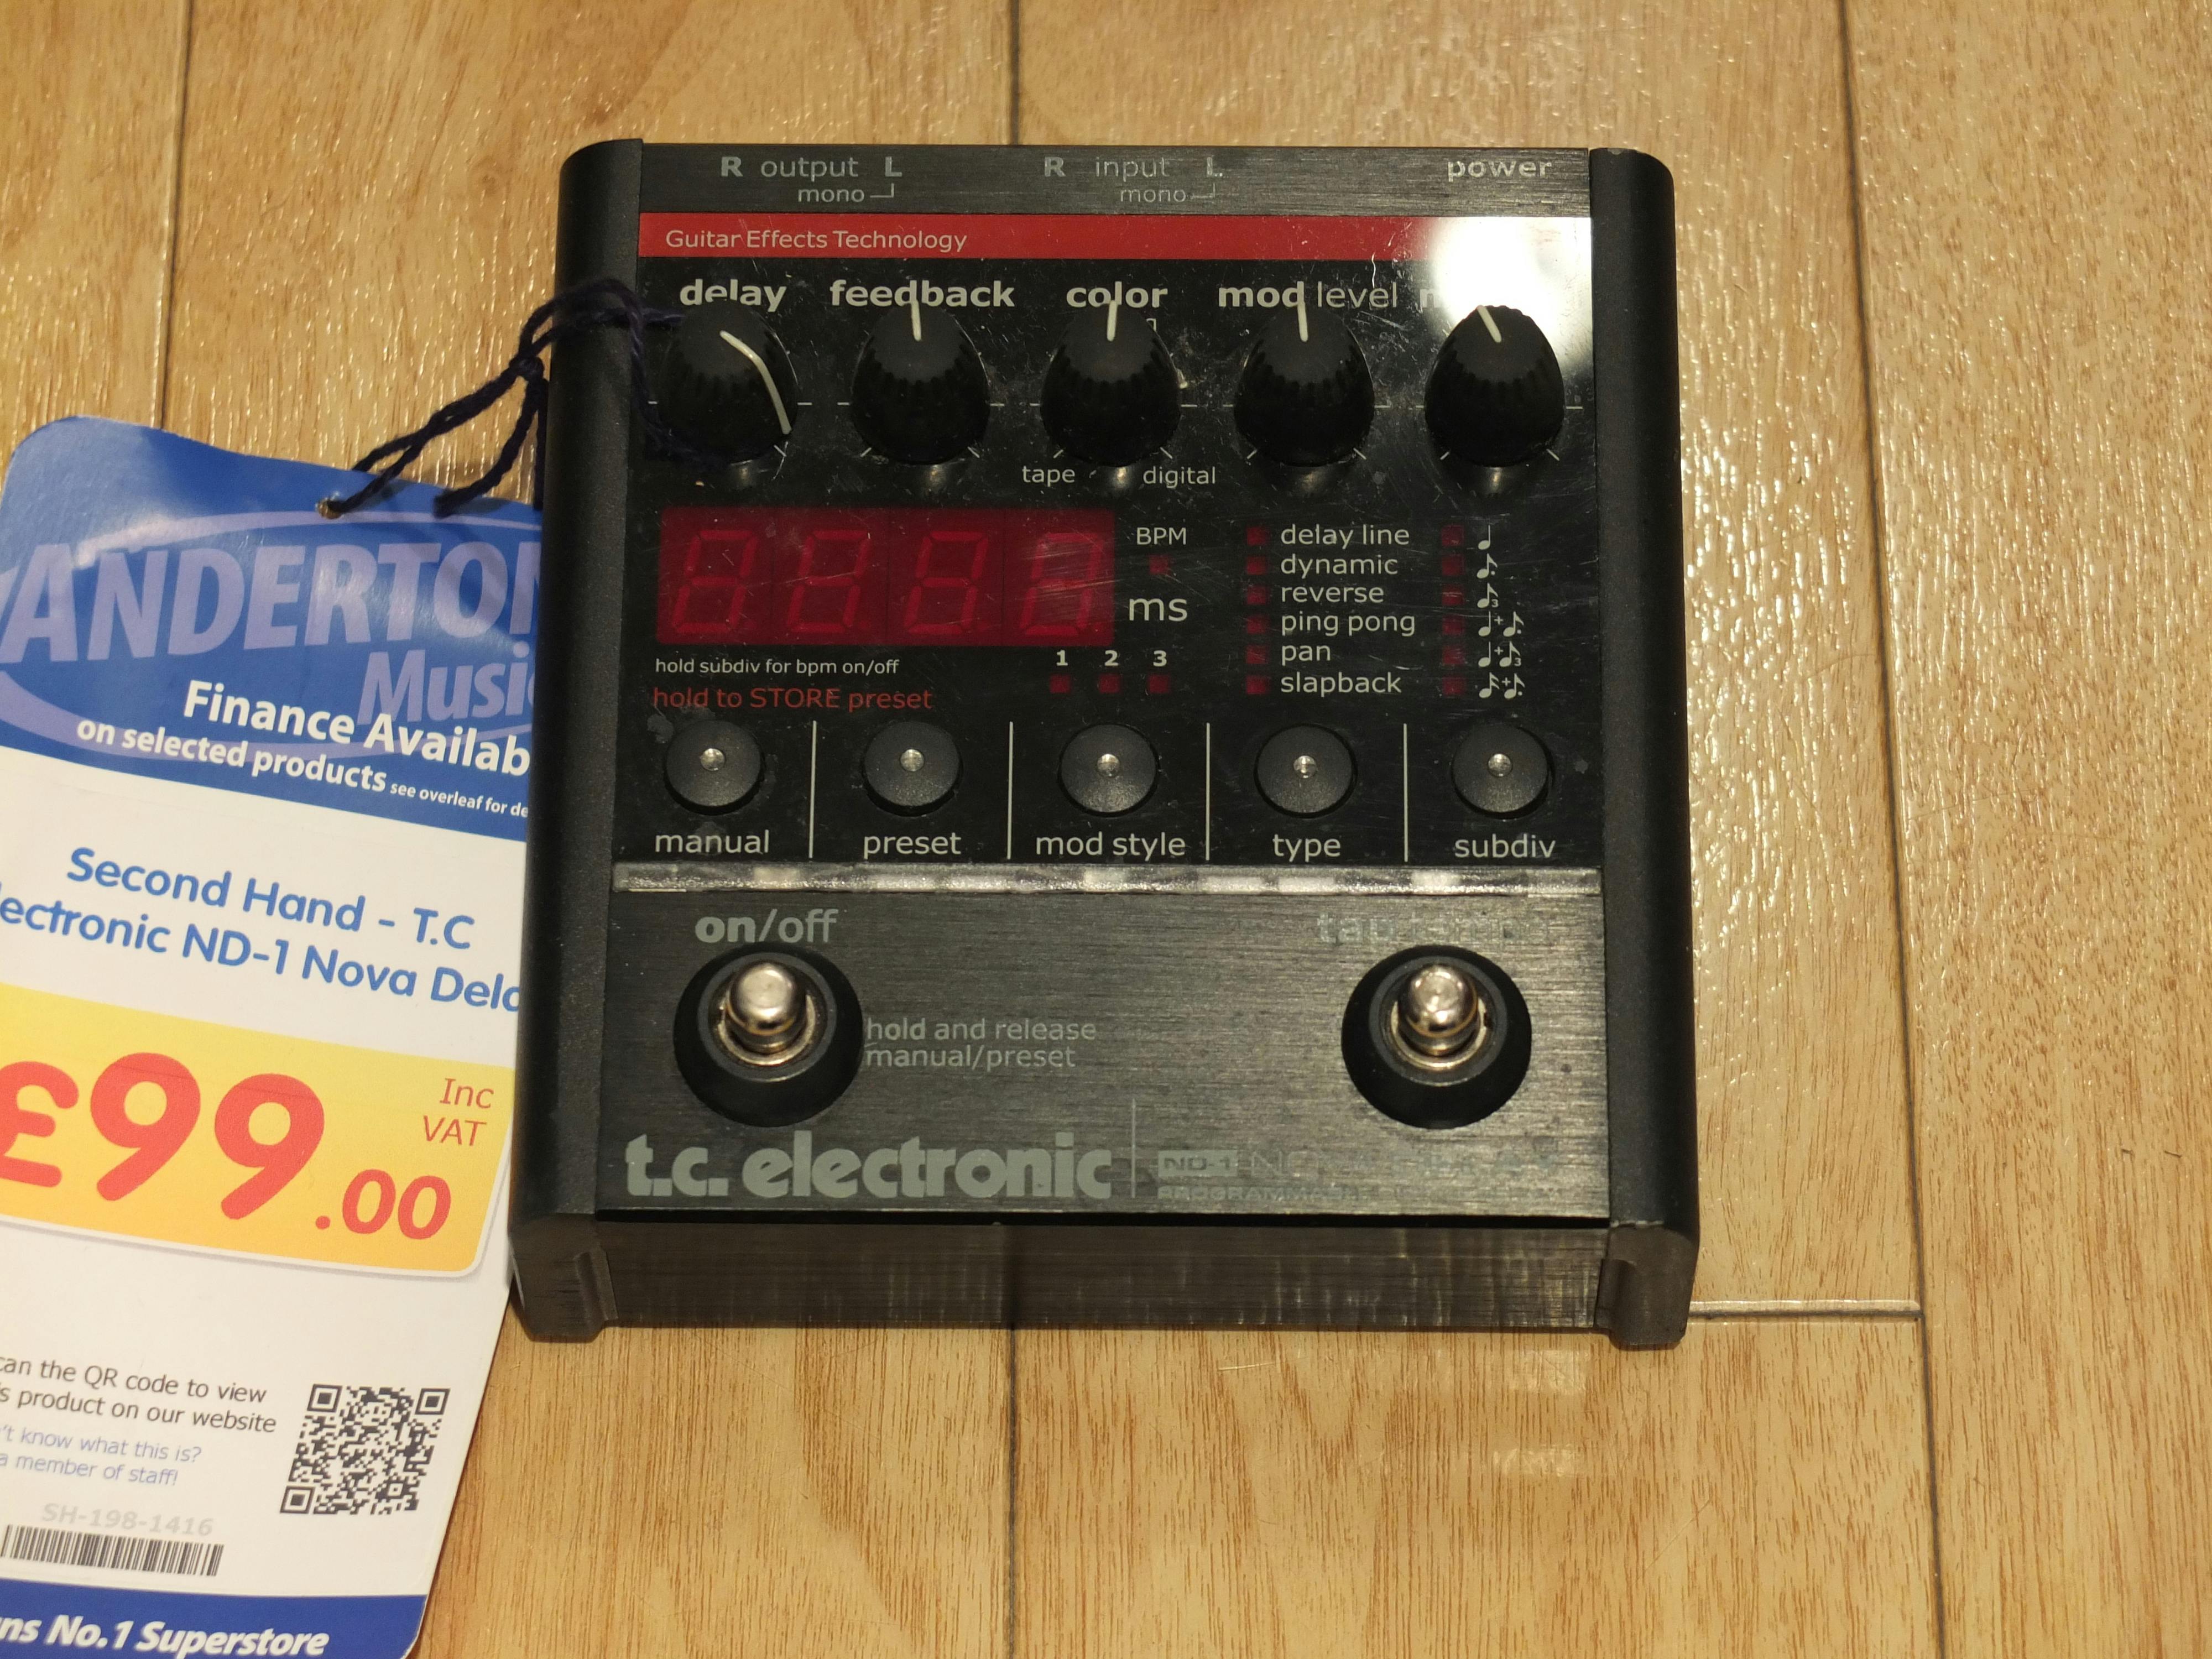 Second Hand - T.C Electronic ND-1 Nova Delay - Andertons Music Co.